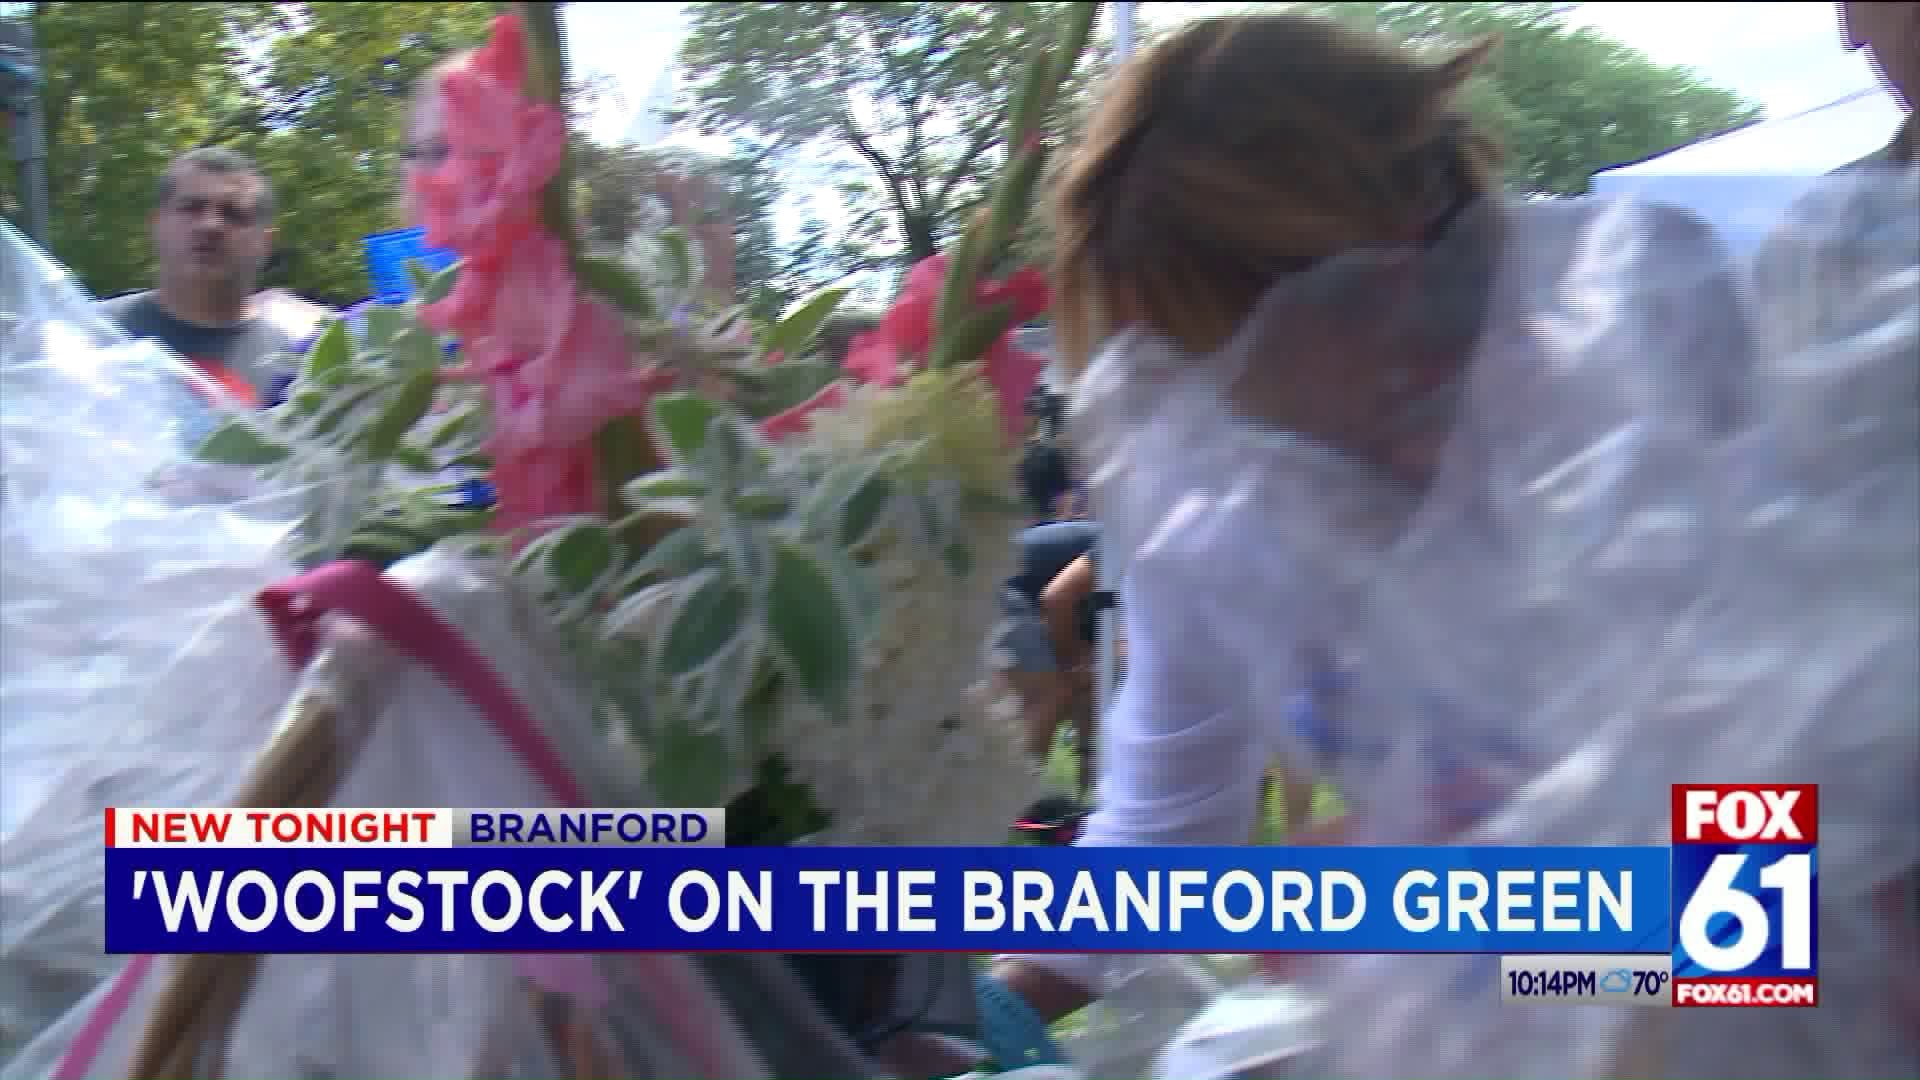 Annual Woofstock on Branford Green held to help local animal shelter